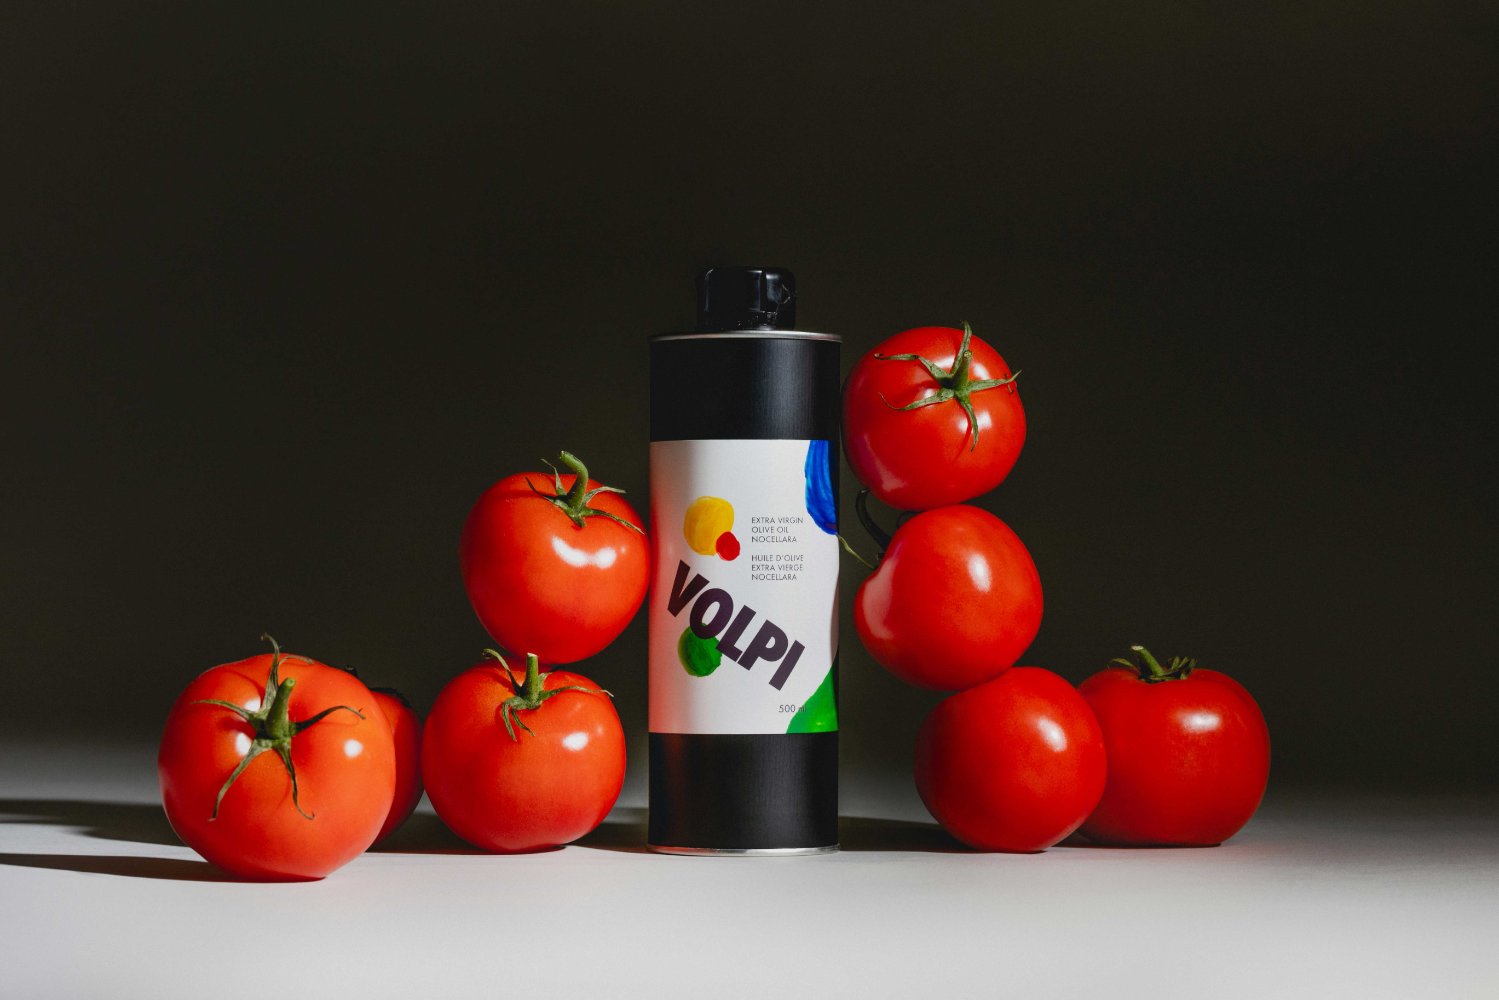 Volpi’s Bruno Munari-Inspired Olive Oil Infuses Modern Art Chic Into Everyday Dining